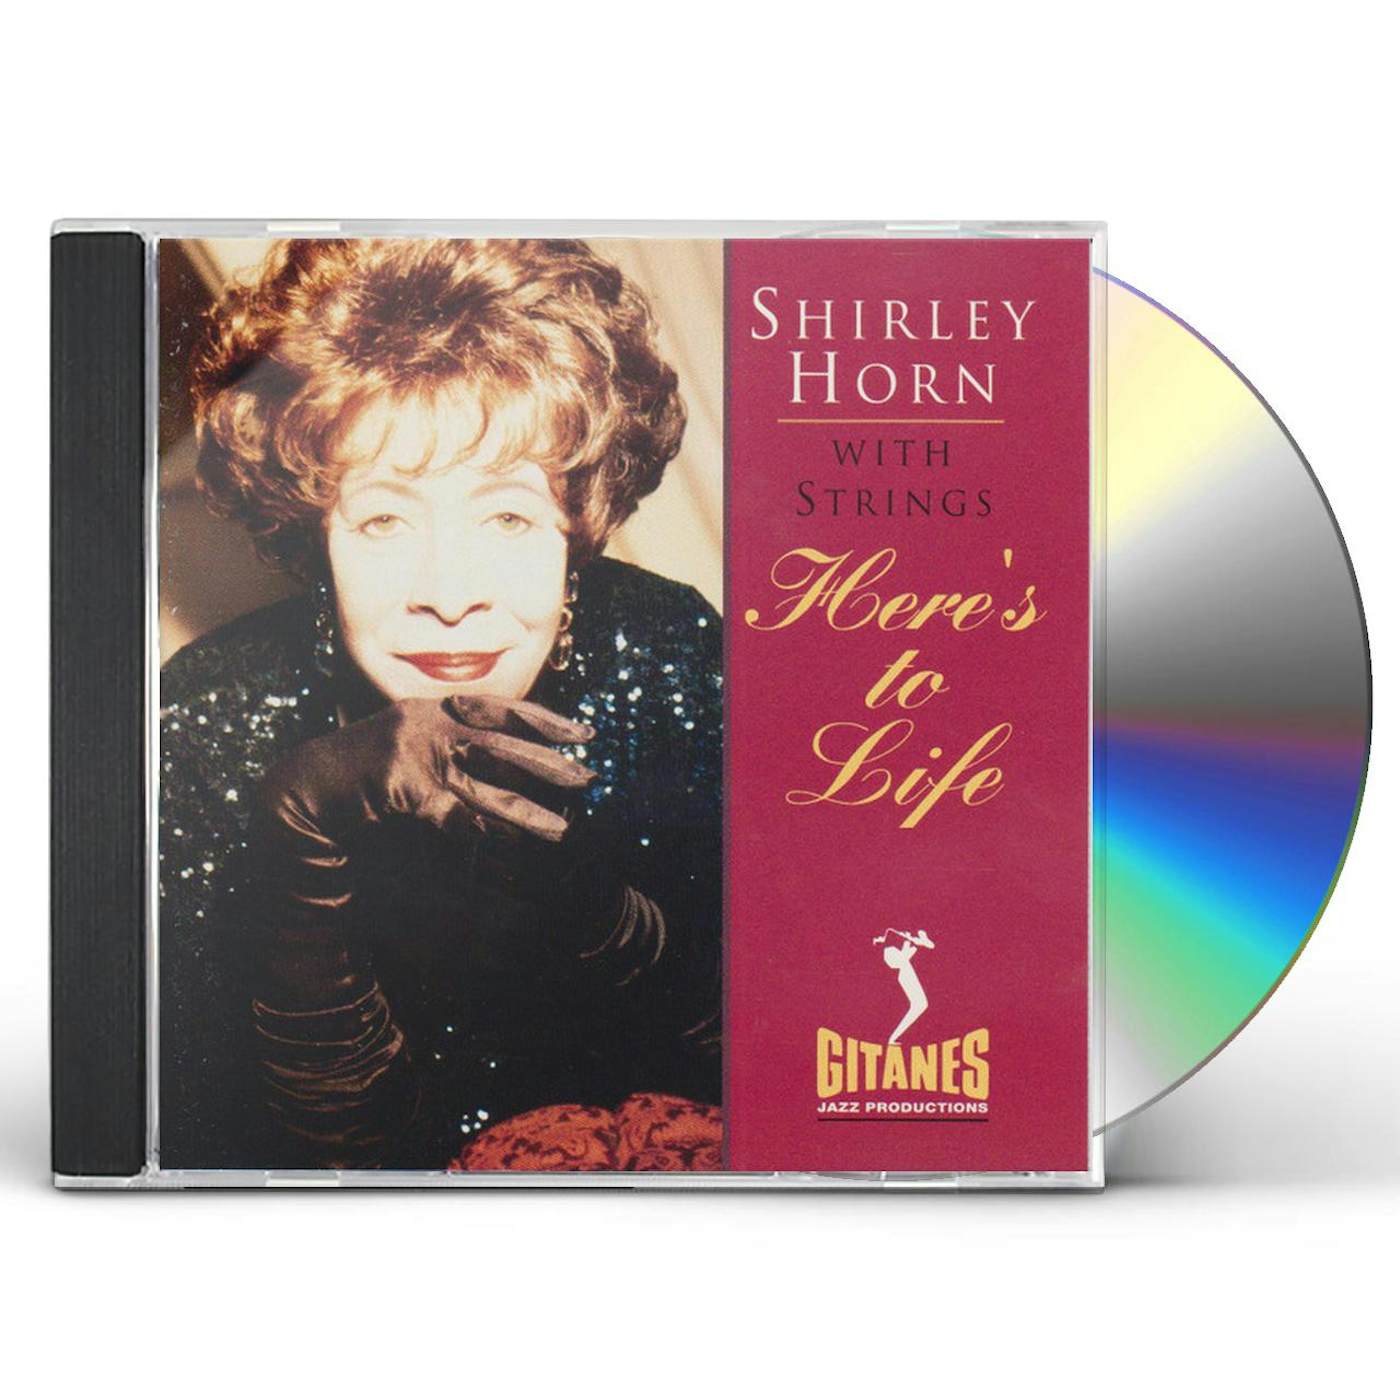 Shirley Horn HERE'S TO LIFE CD